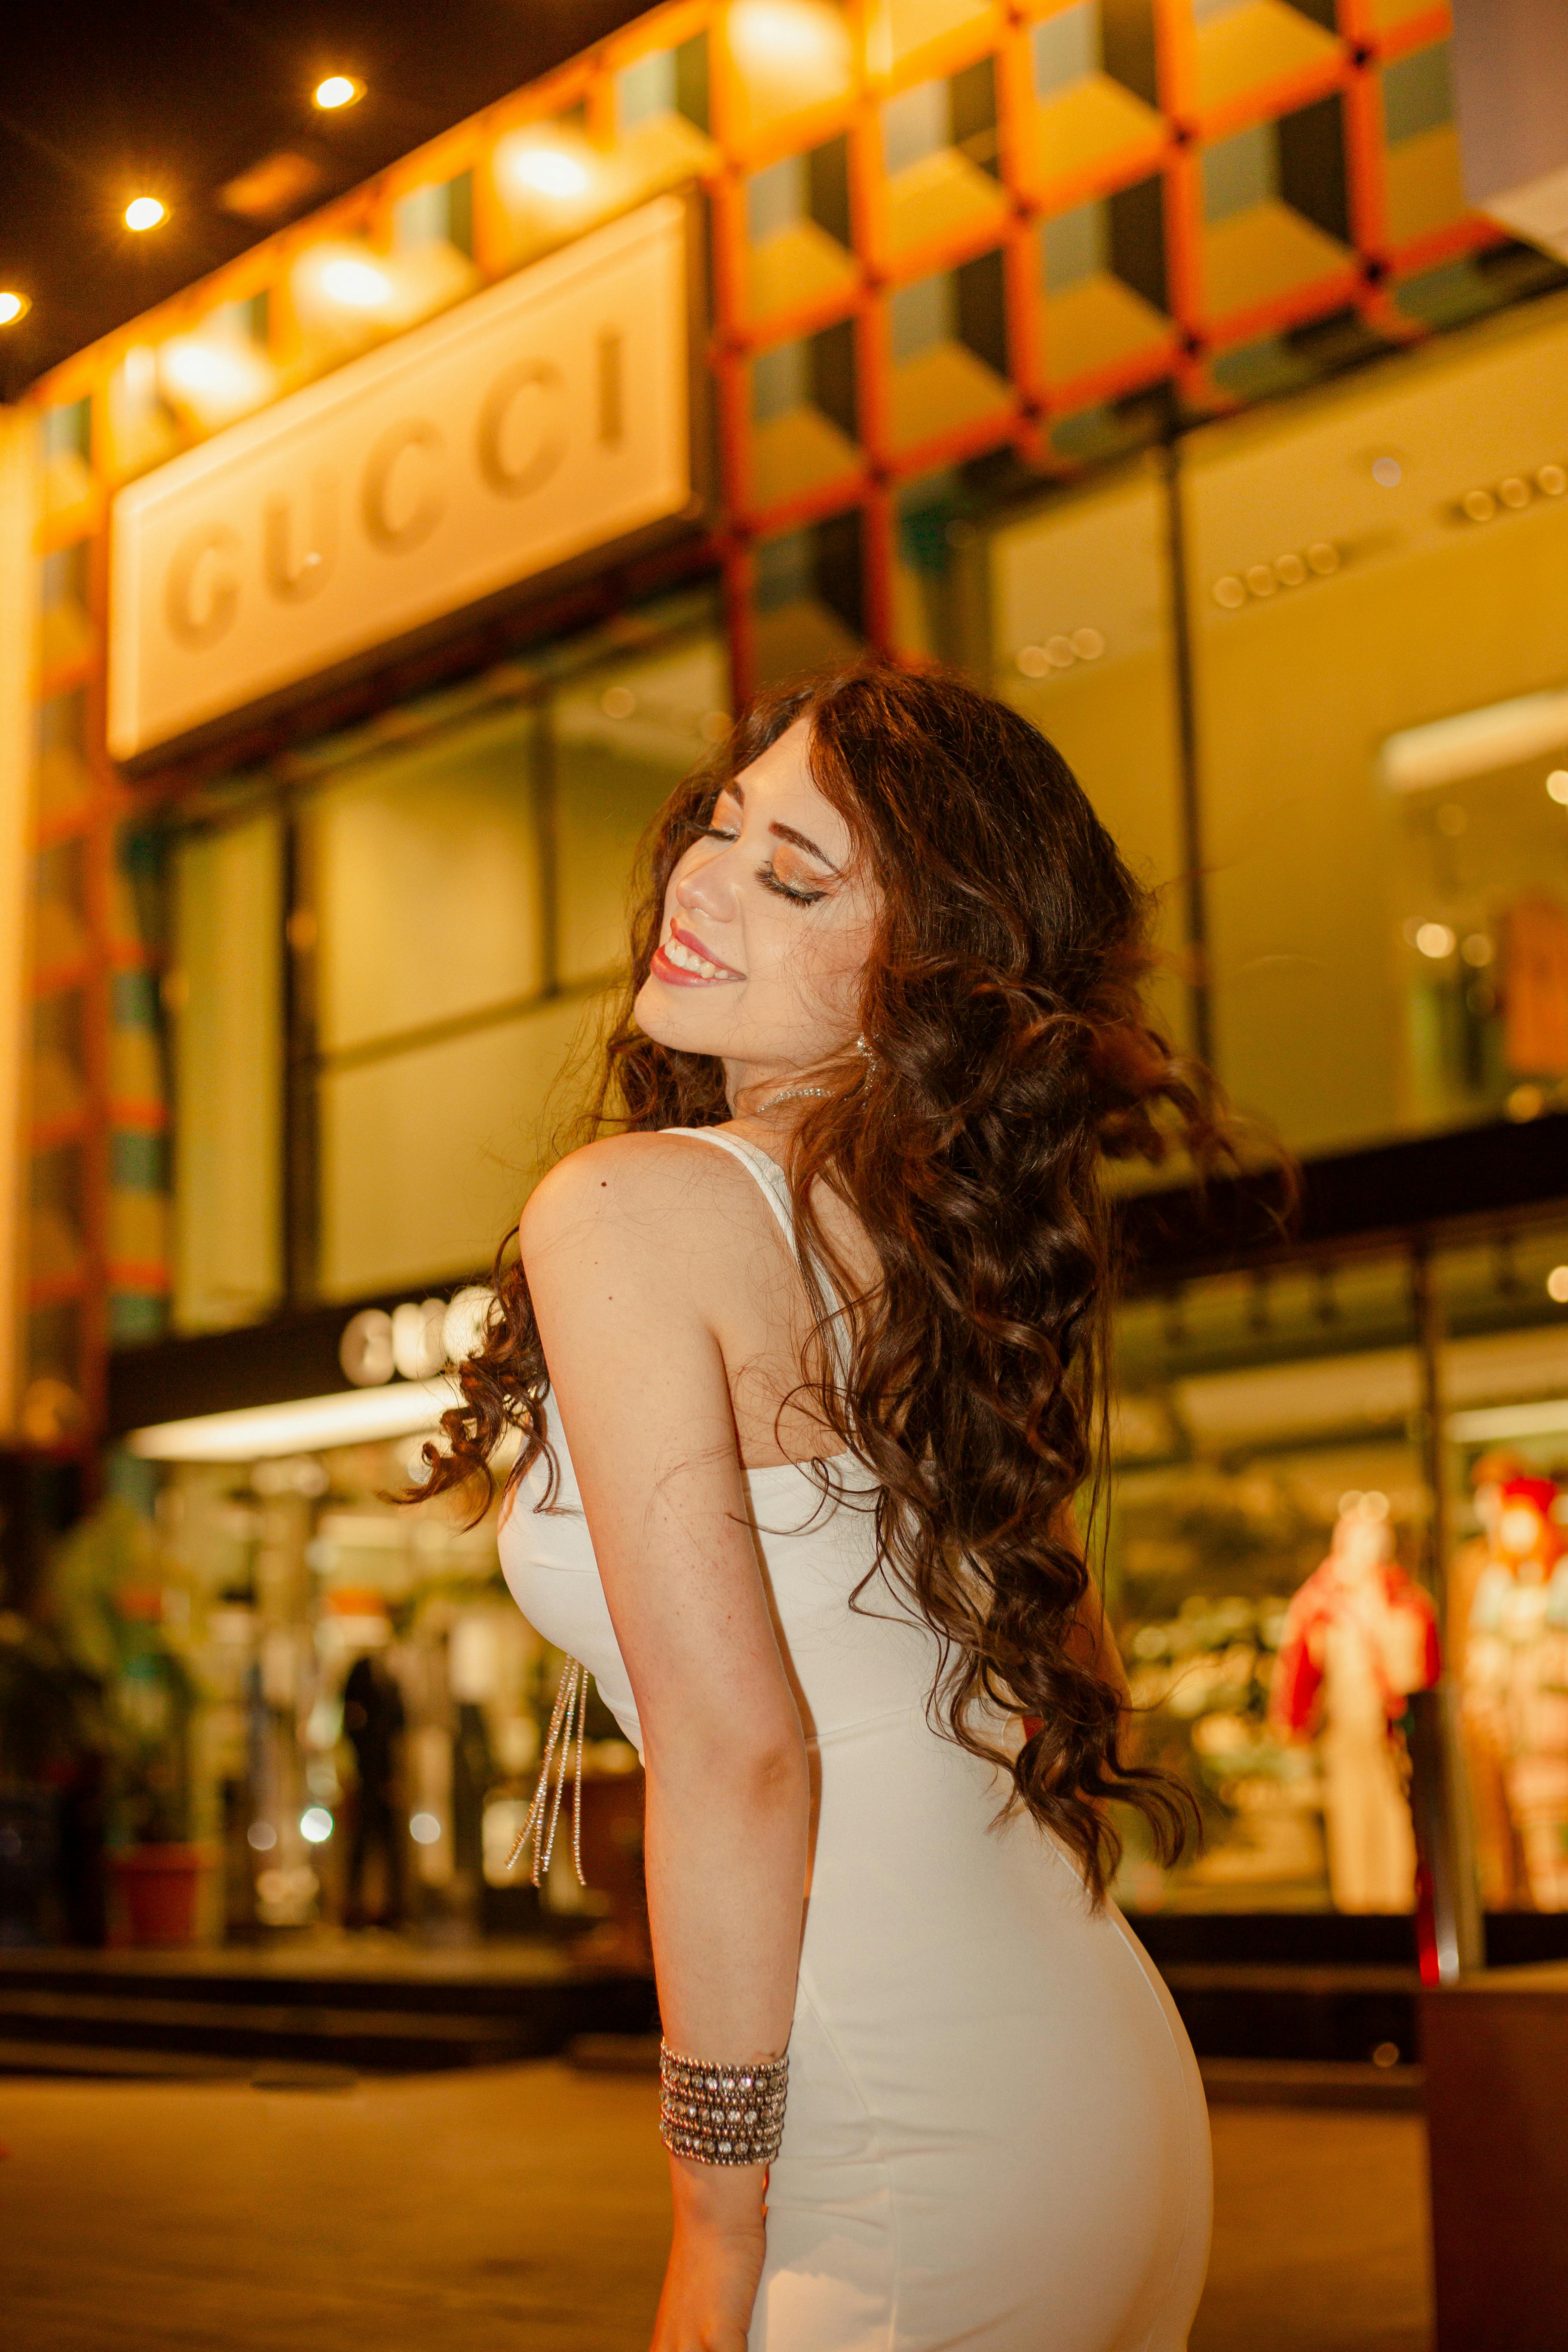 Free Photos - A Stunning Woman Wearing A White Dress, Likely A Bridal Gown,  As She Poses In Front Of A Blue Door. She Is Leaning Against The Door,  Holding A Handbag,